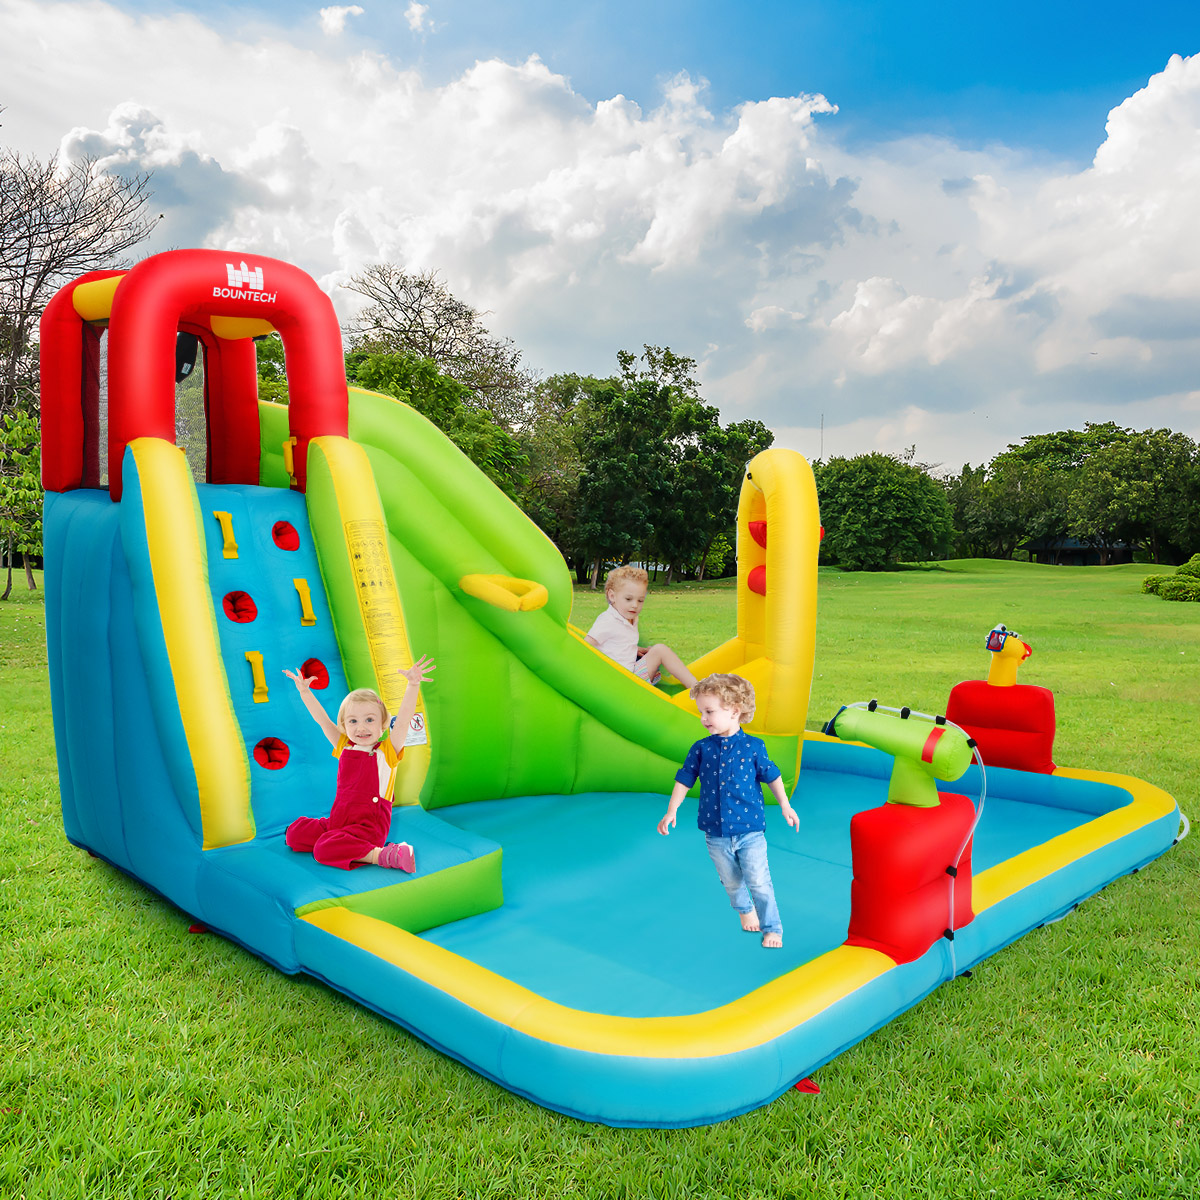 Topbuy Inflatable Splash Water Park Play Bounce House Bounce Slide Climbing Wall Without Blower